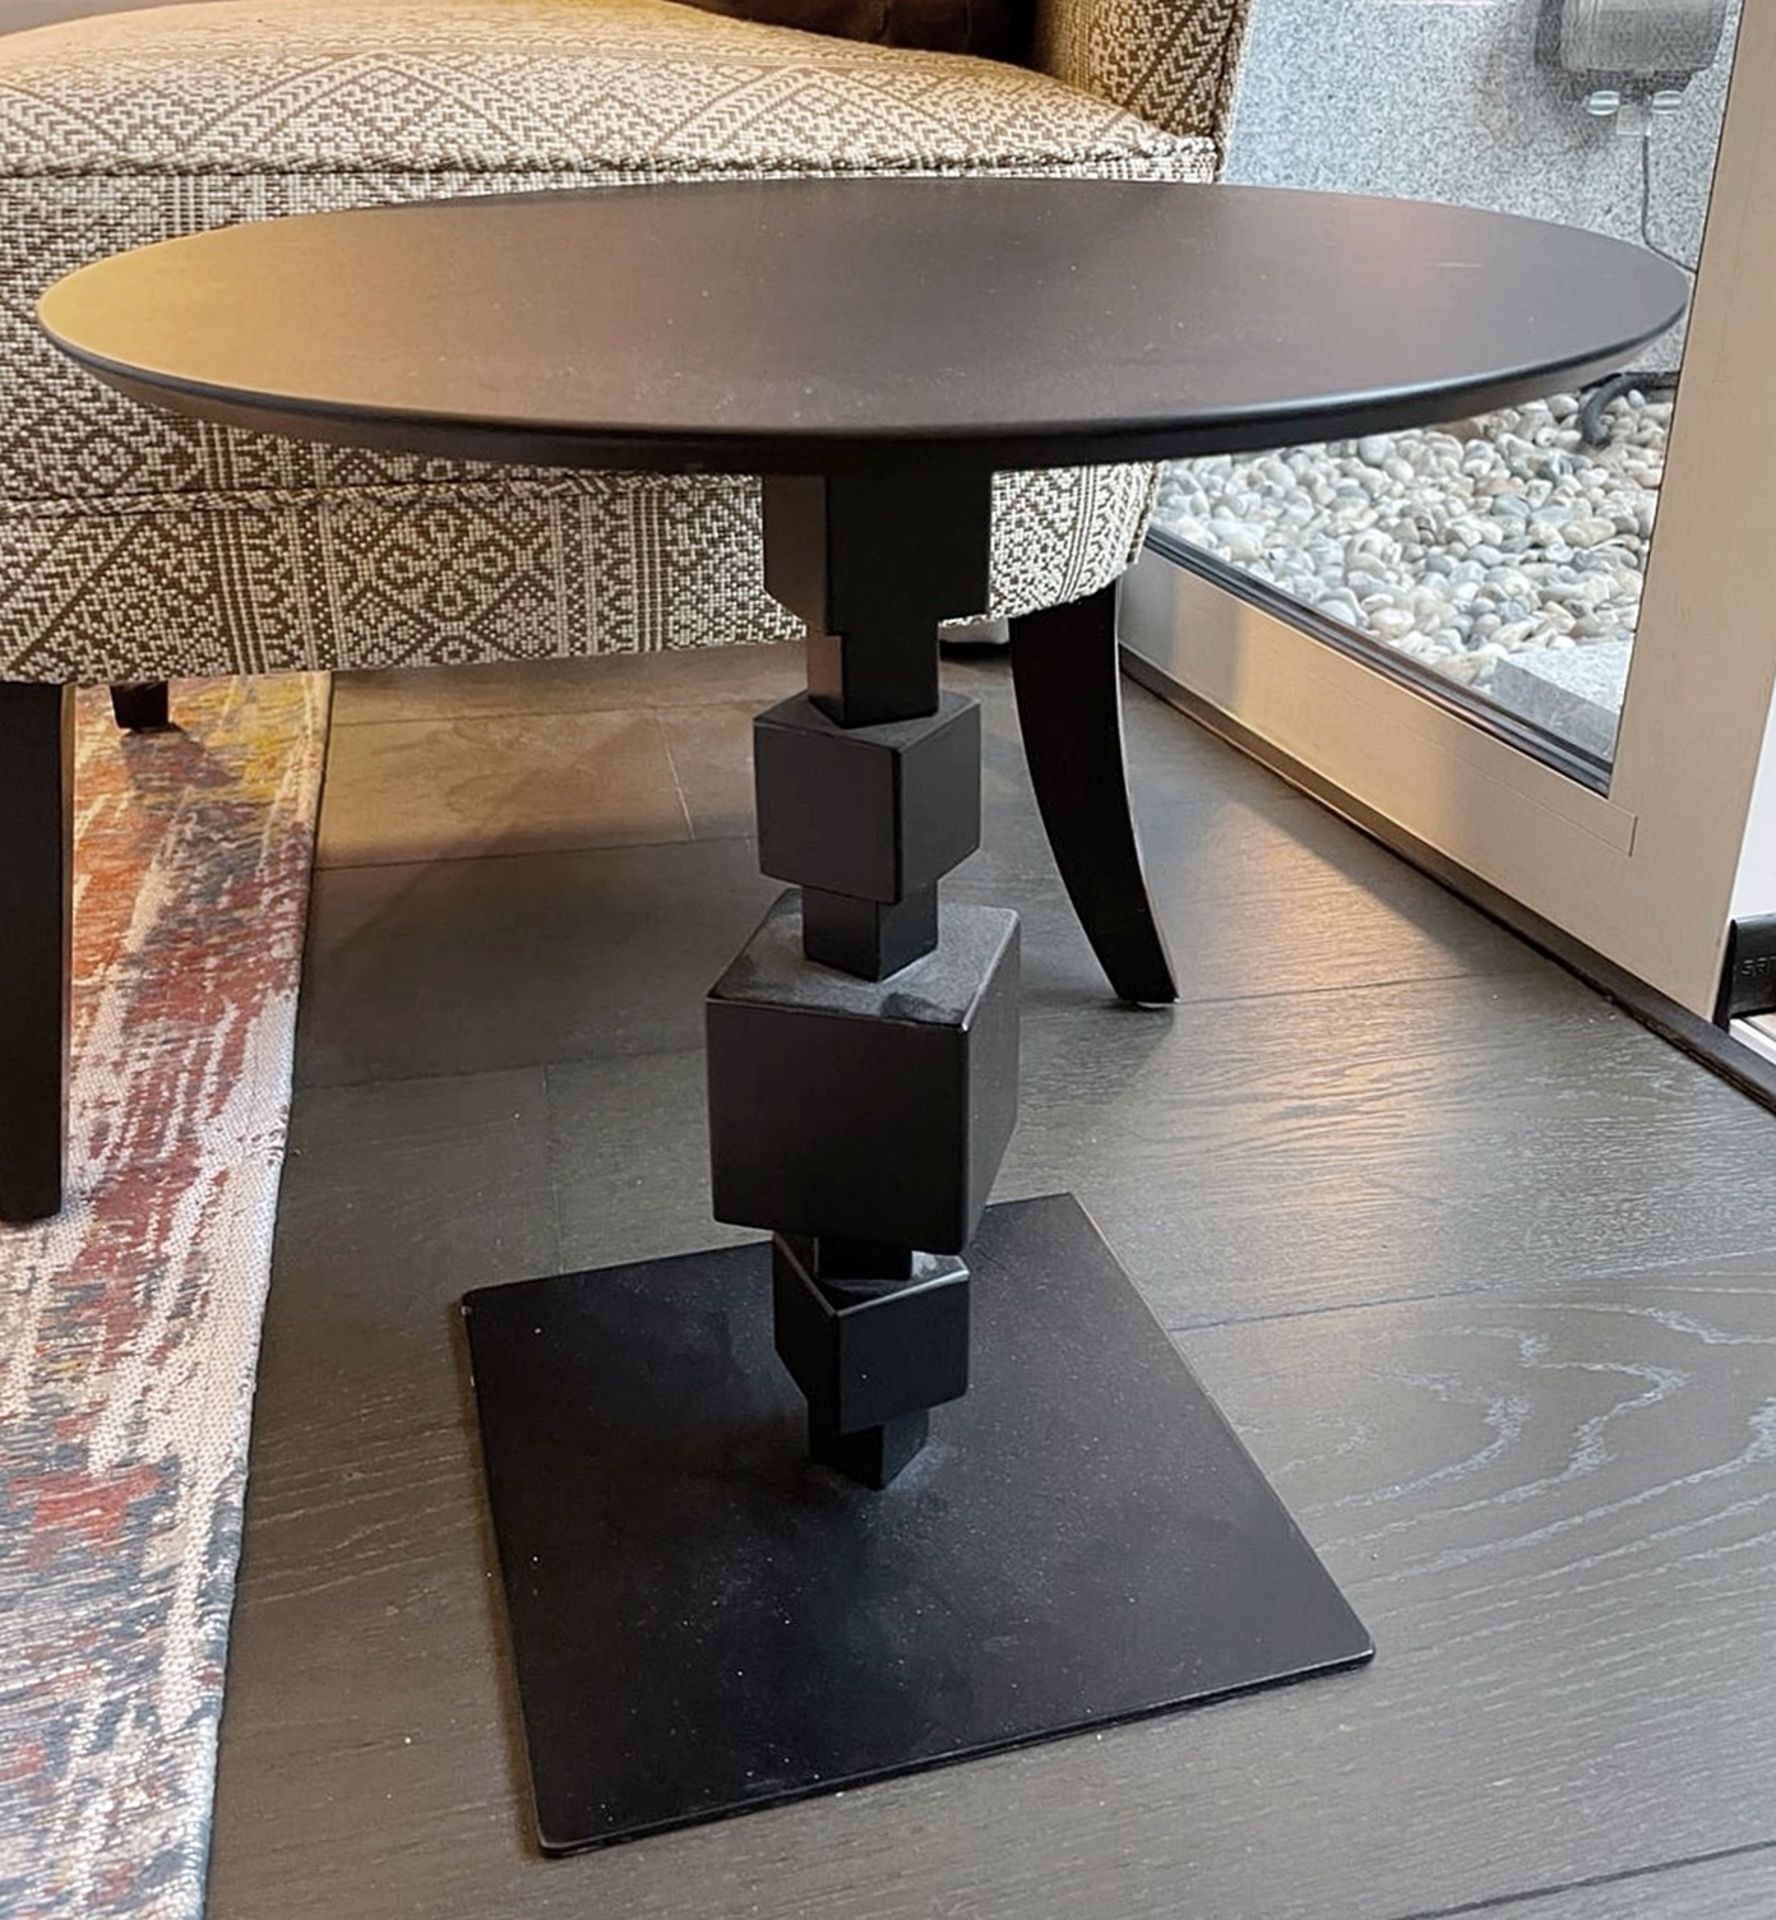 1 x NOLITA Occasional Side Table with a Cubed Metal Base, Bronzed Finish and Industrial - Image 3 of 9